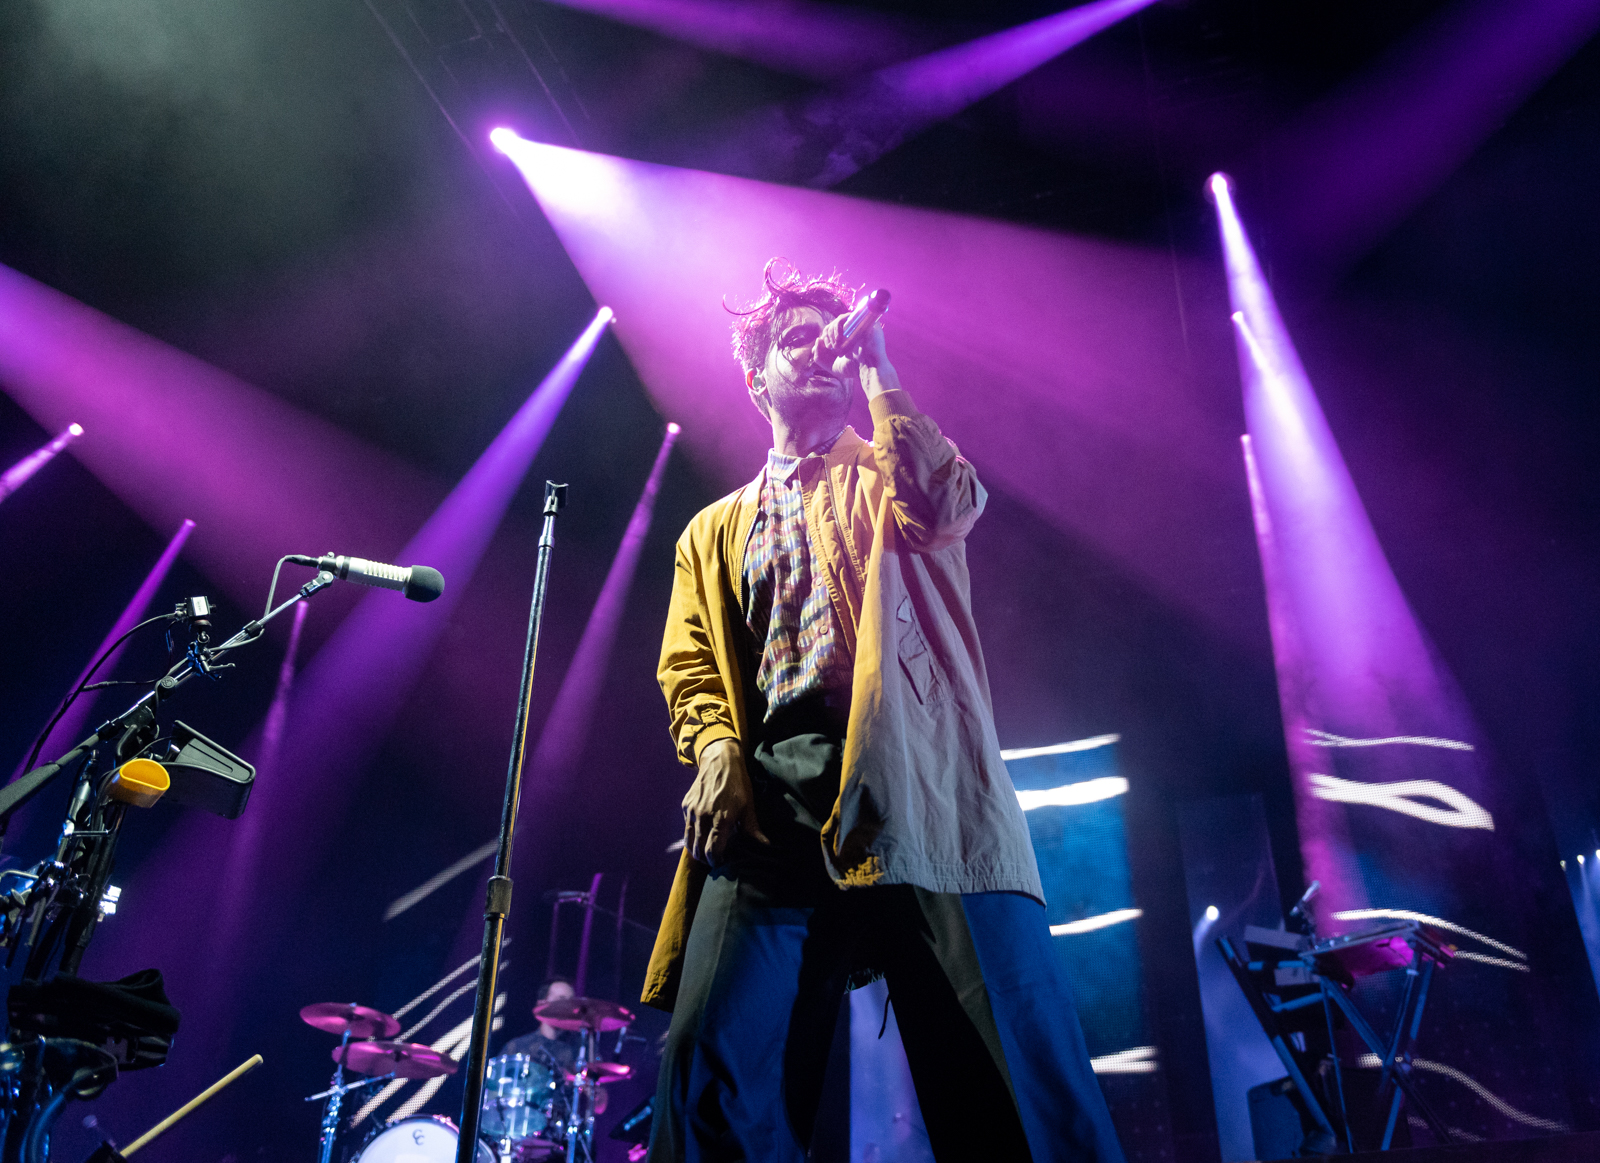 Gallery: Young the Giant, Fitz and the Tantrums Summer Tour - Daily Bruin